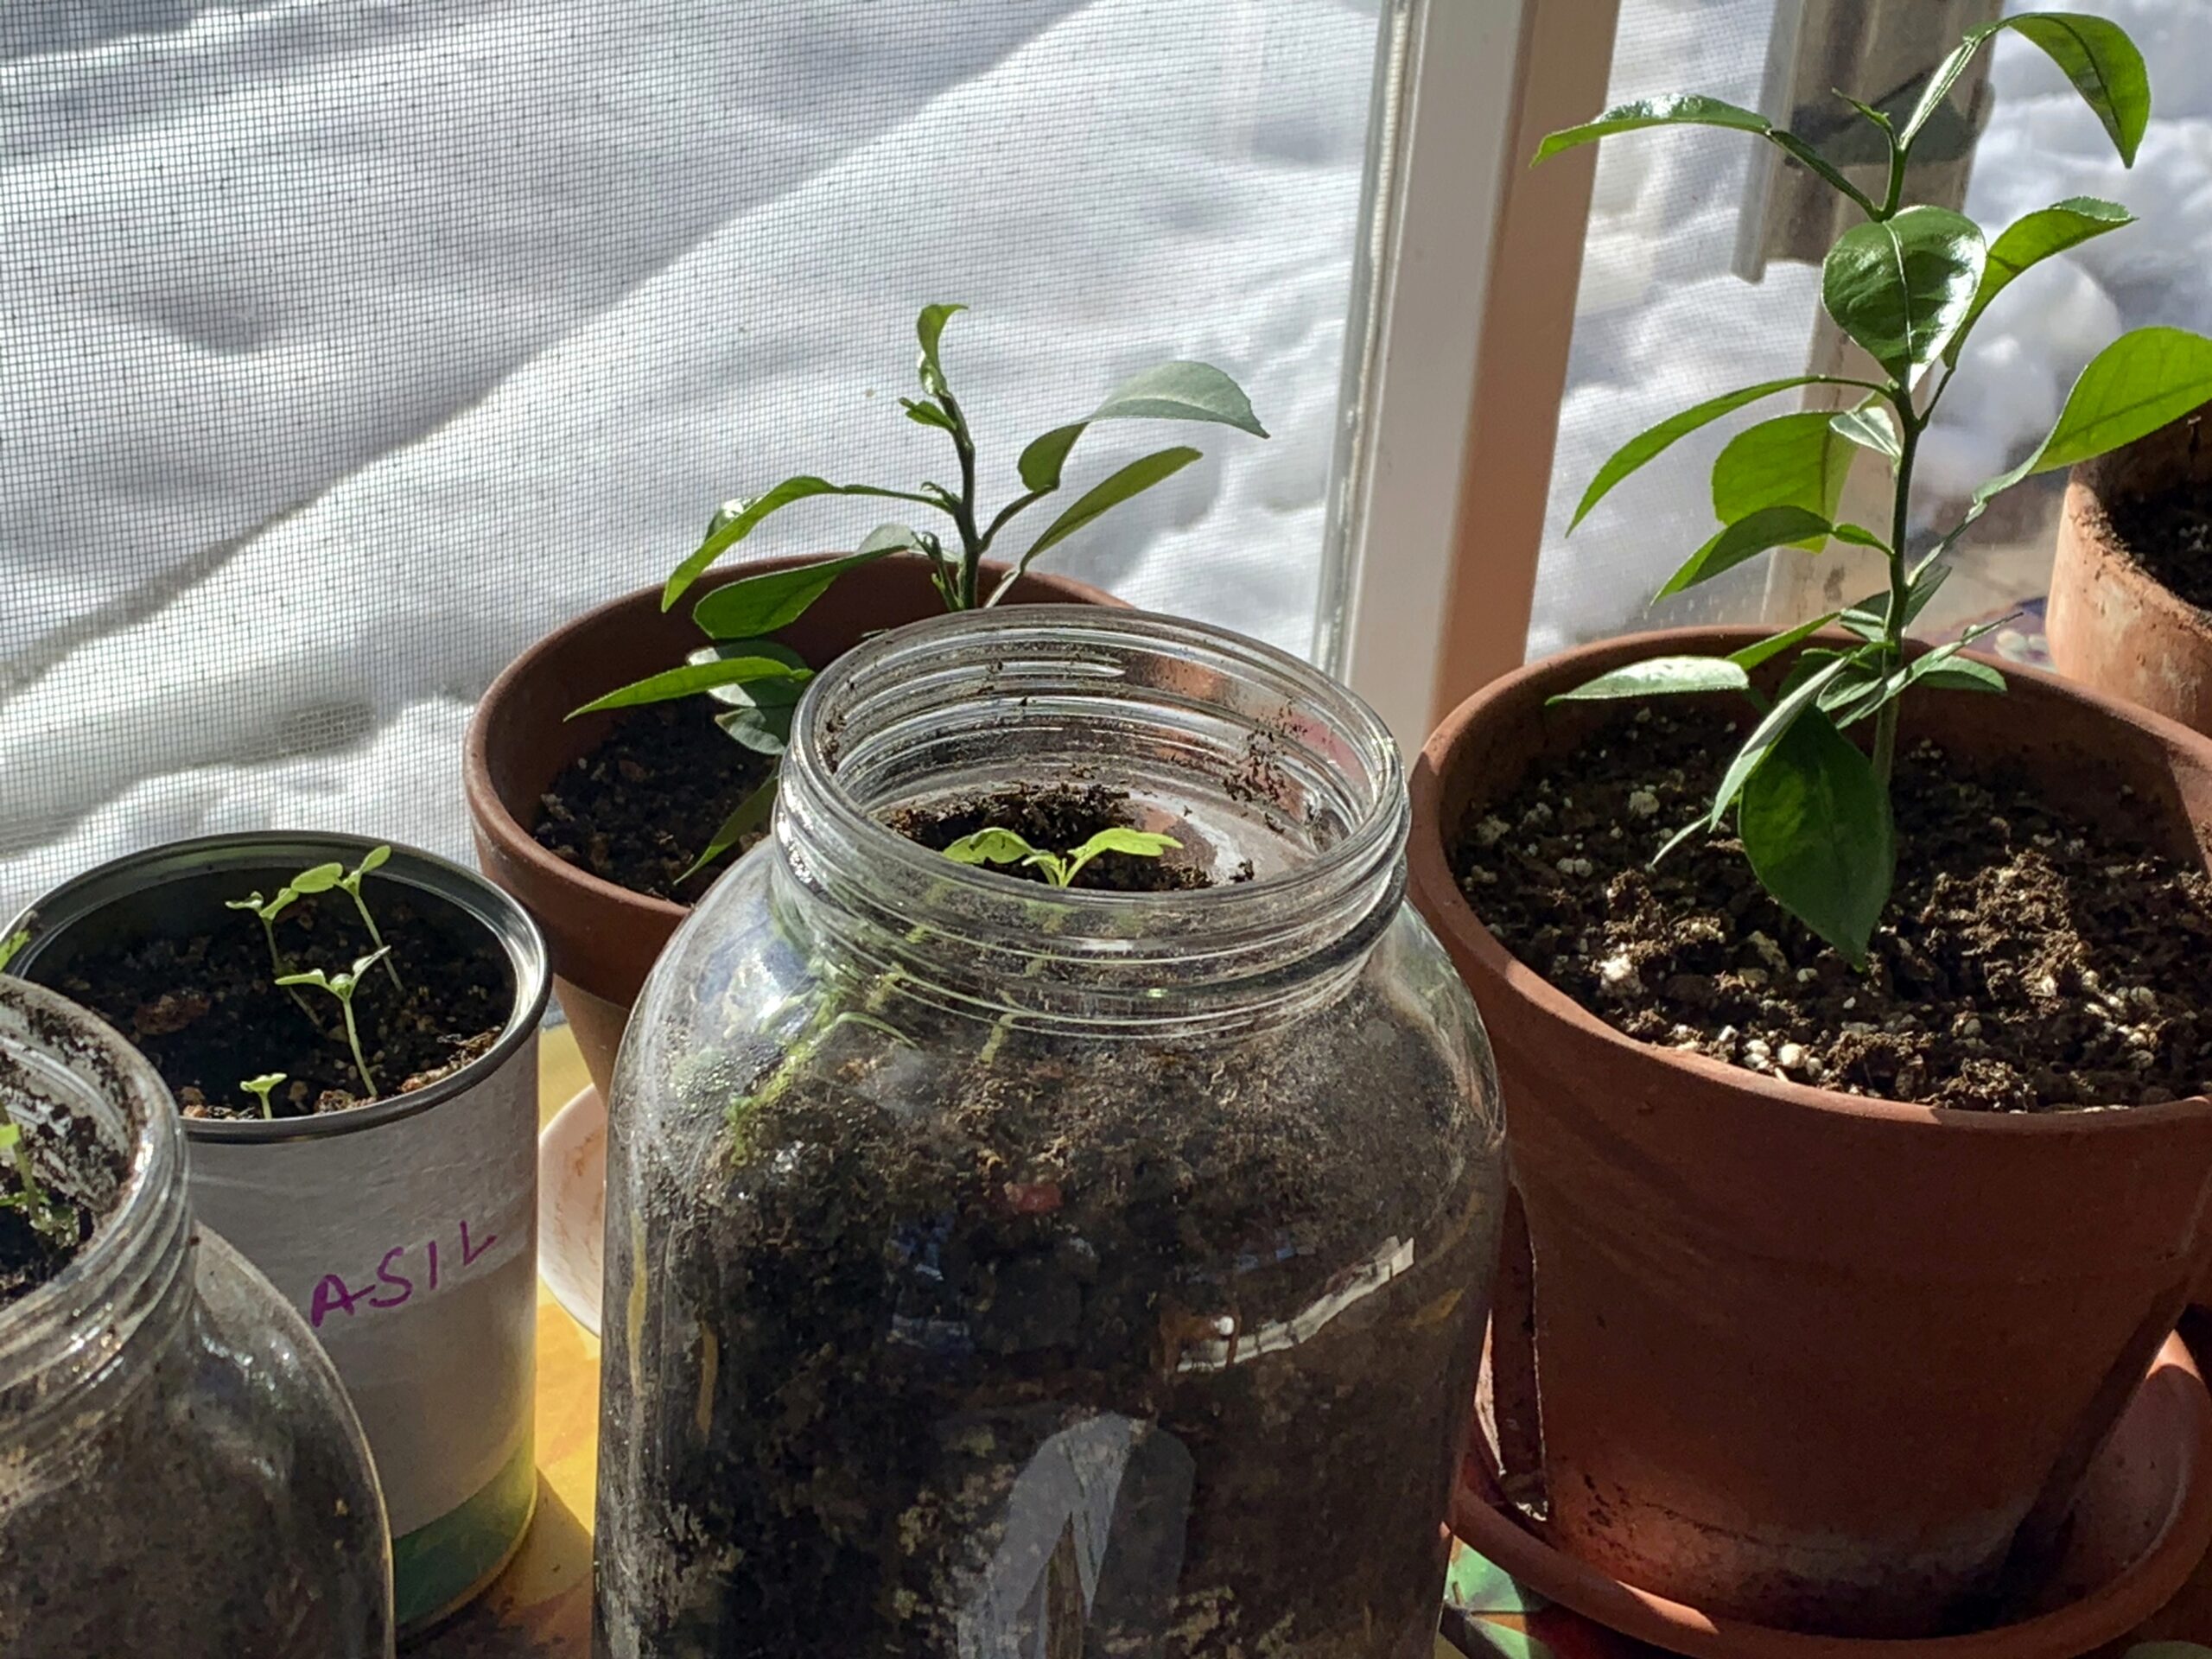 Vegetable seedlings and citrus plants appear in pots, jars and cans on a ledge inside a home